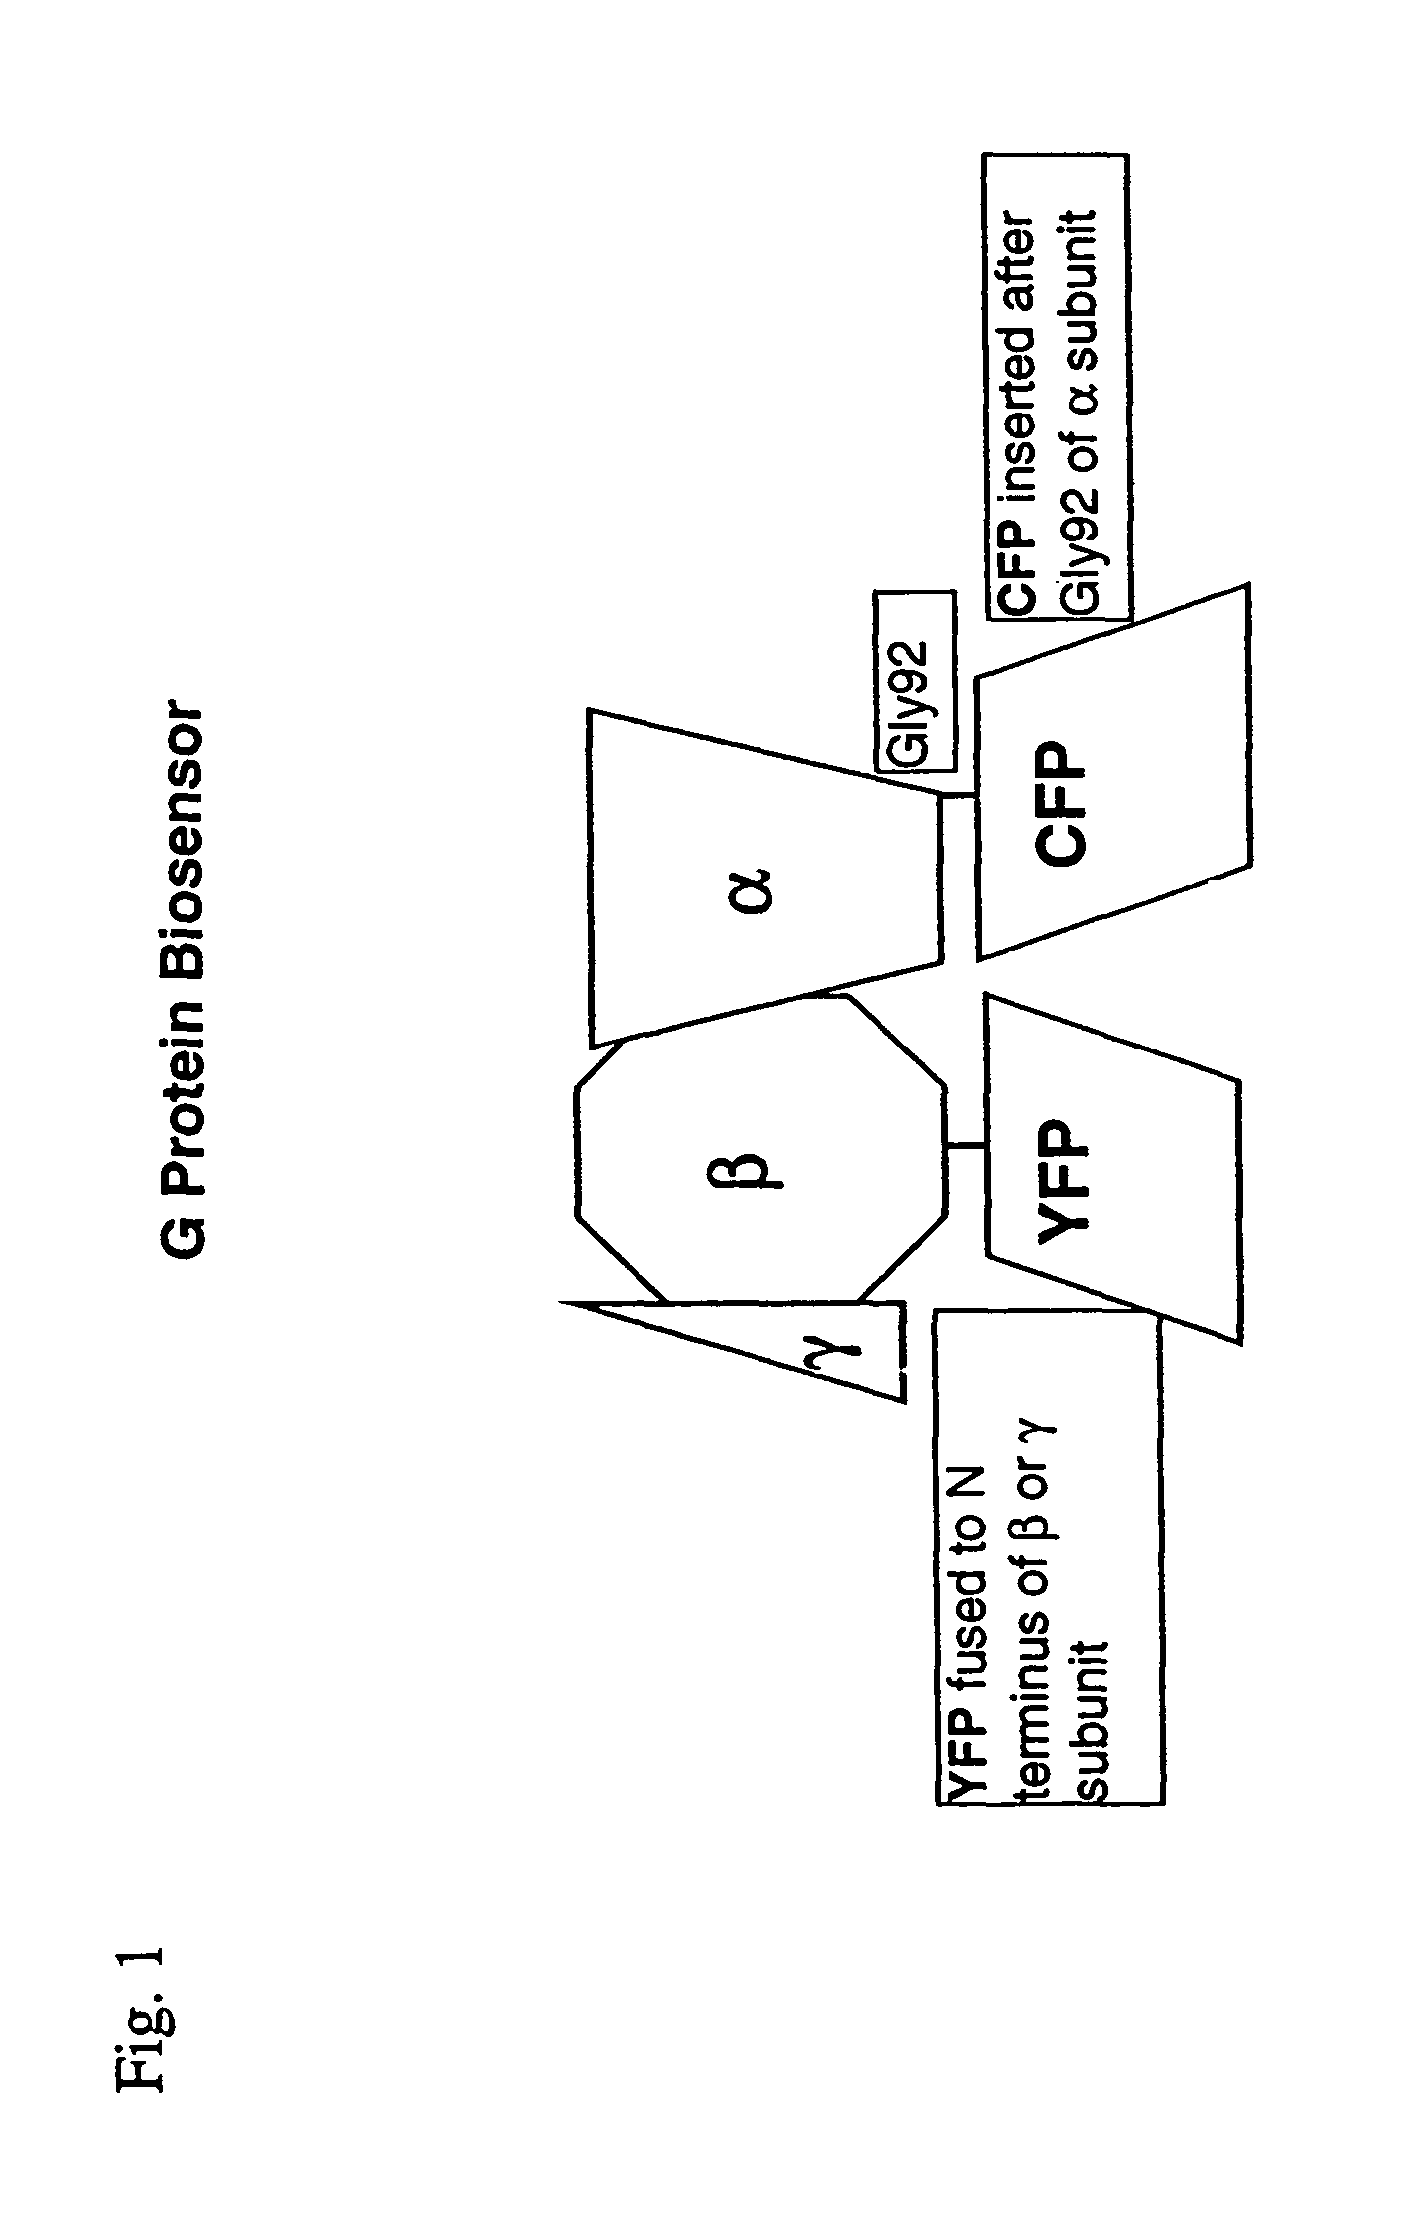 Biosensor and use thereof to identify therapeutic drug molecules and molecules binding orphan receptors